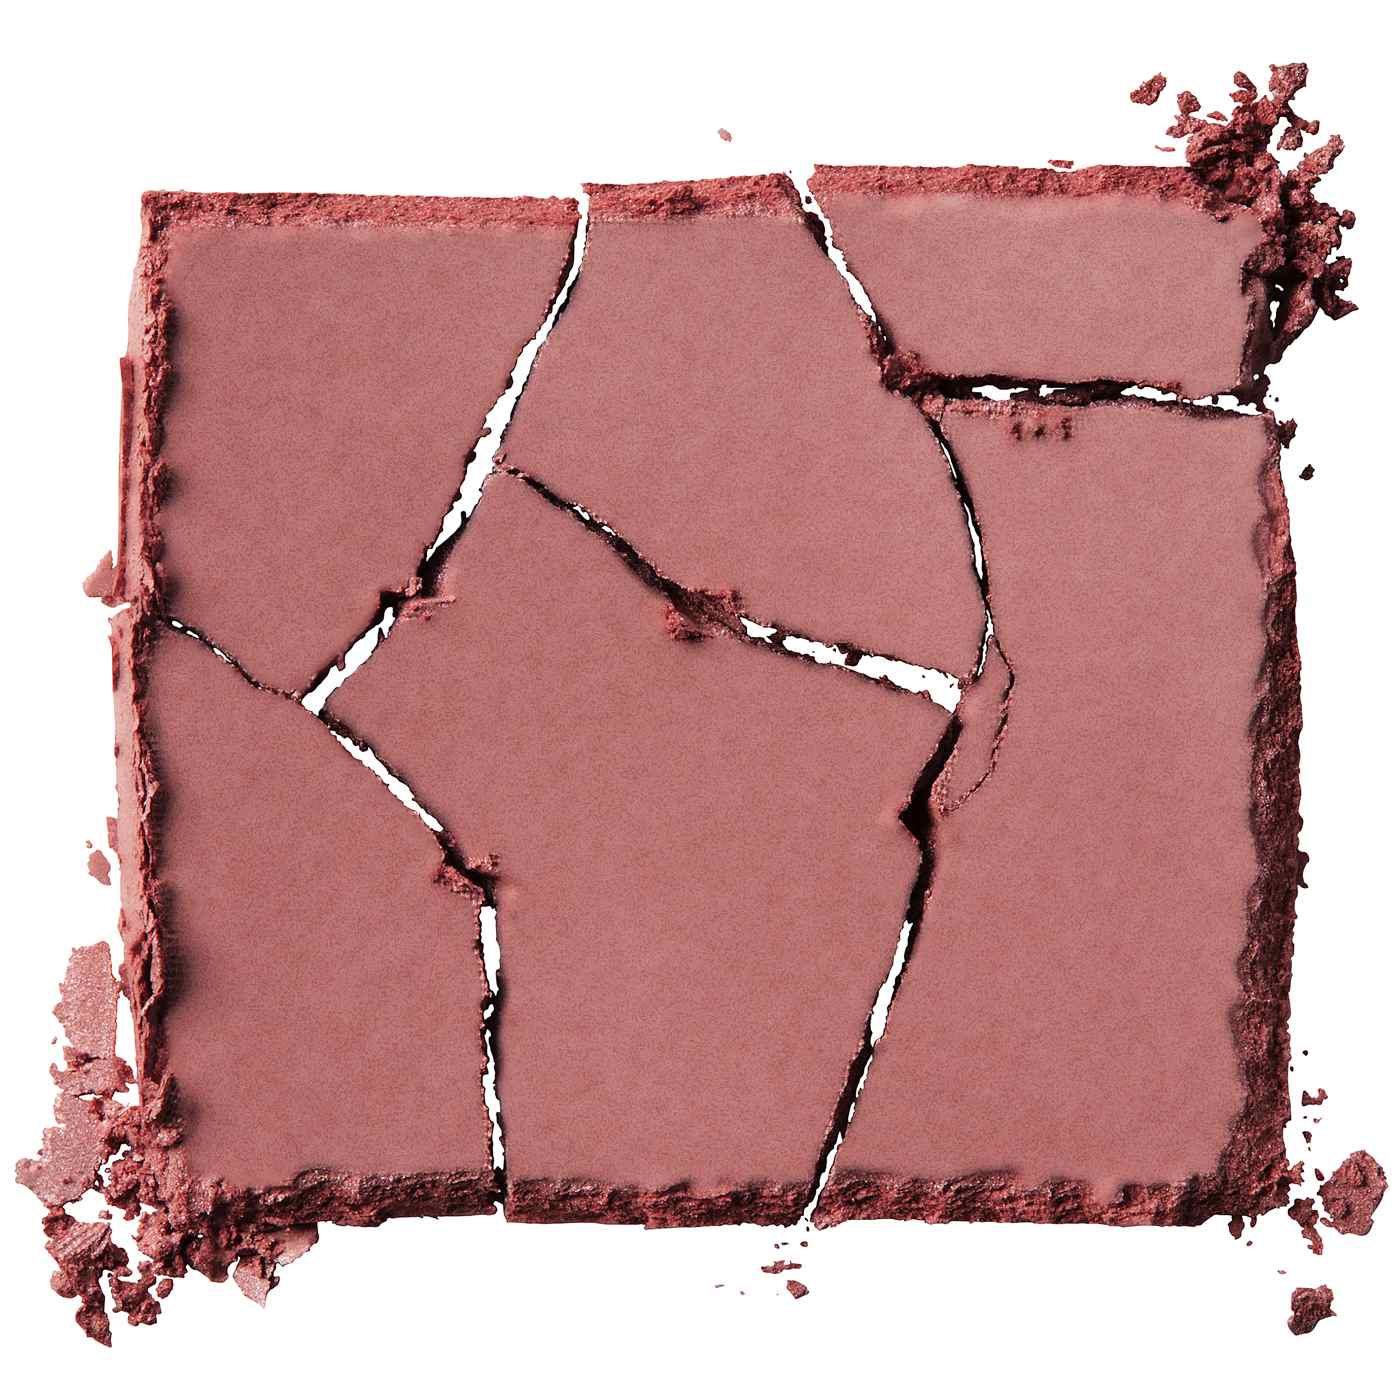 Maybelline Fit Me Blush, Plum; image 4 of 4